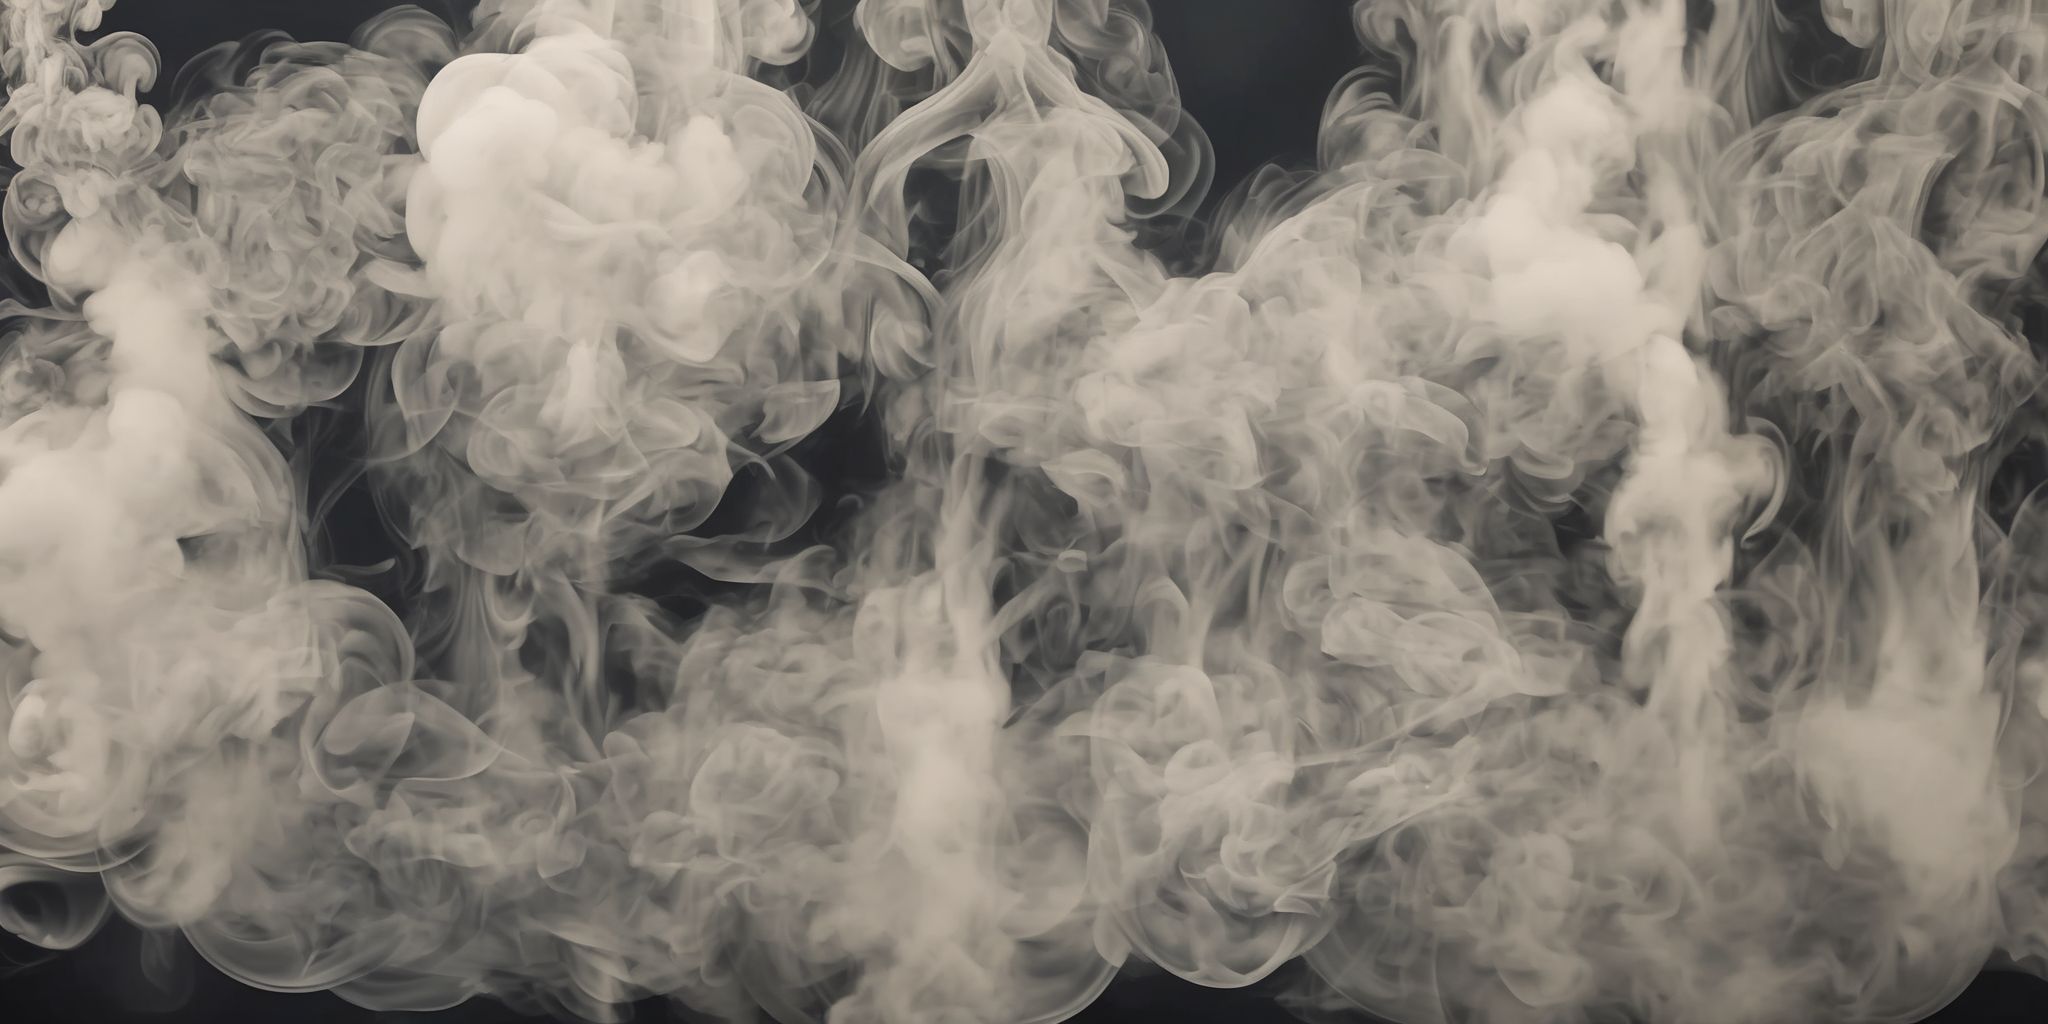 Smoke and mirrors  in realistic, photographic style